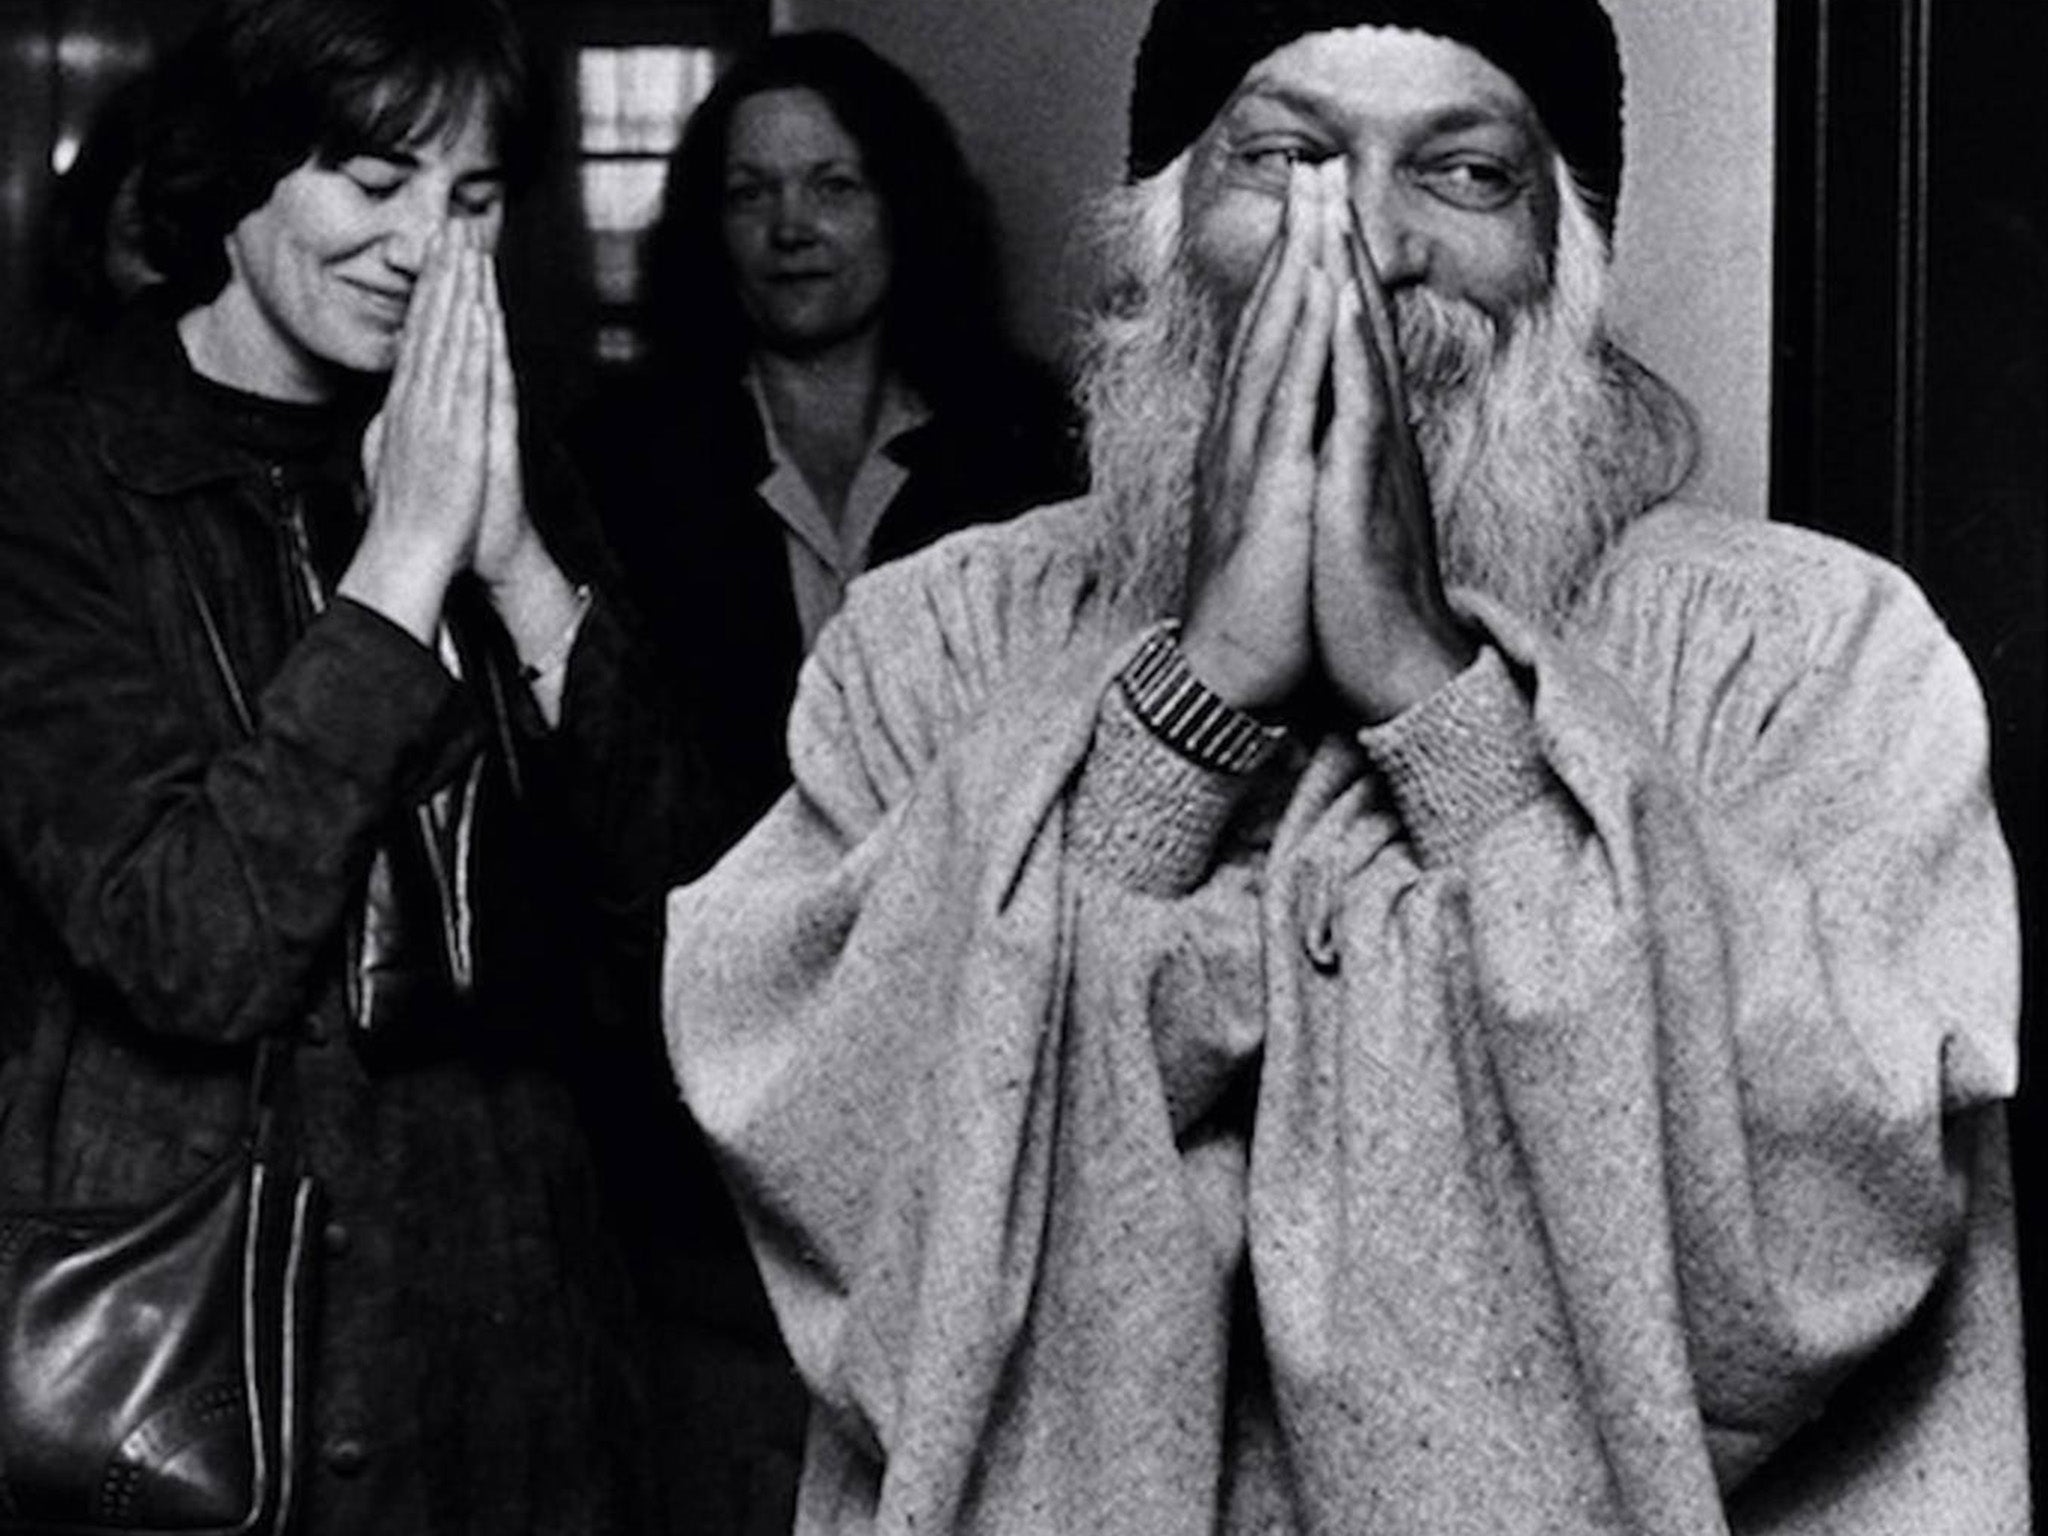 Bhagwan Shree Rajneesh and the movement he led have catapulted cults back into the spotlight